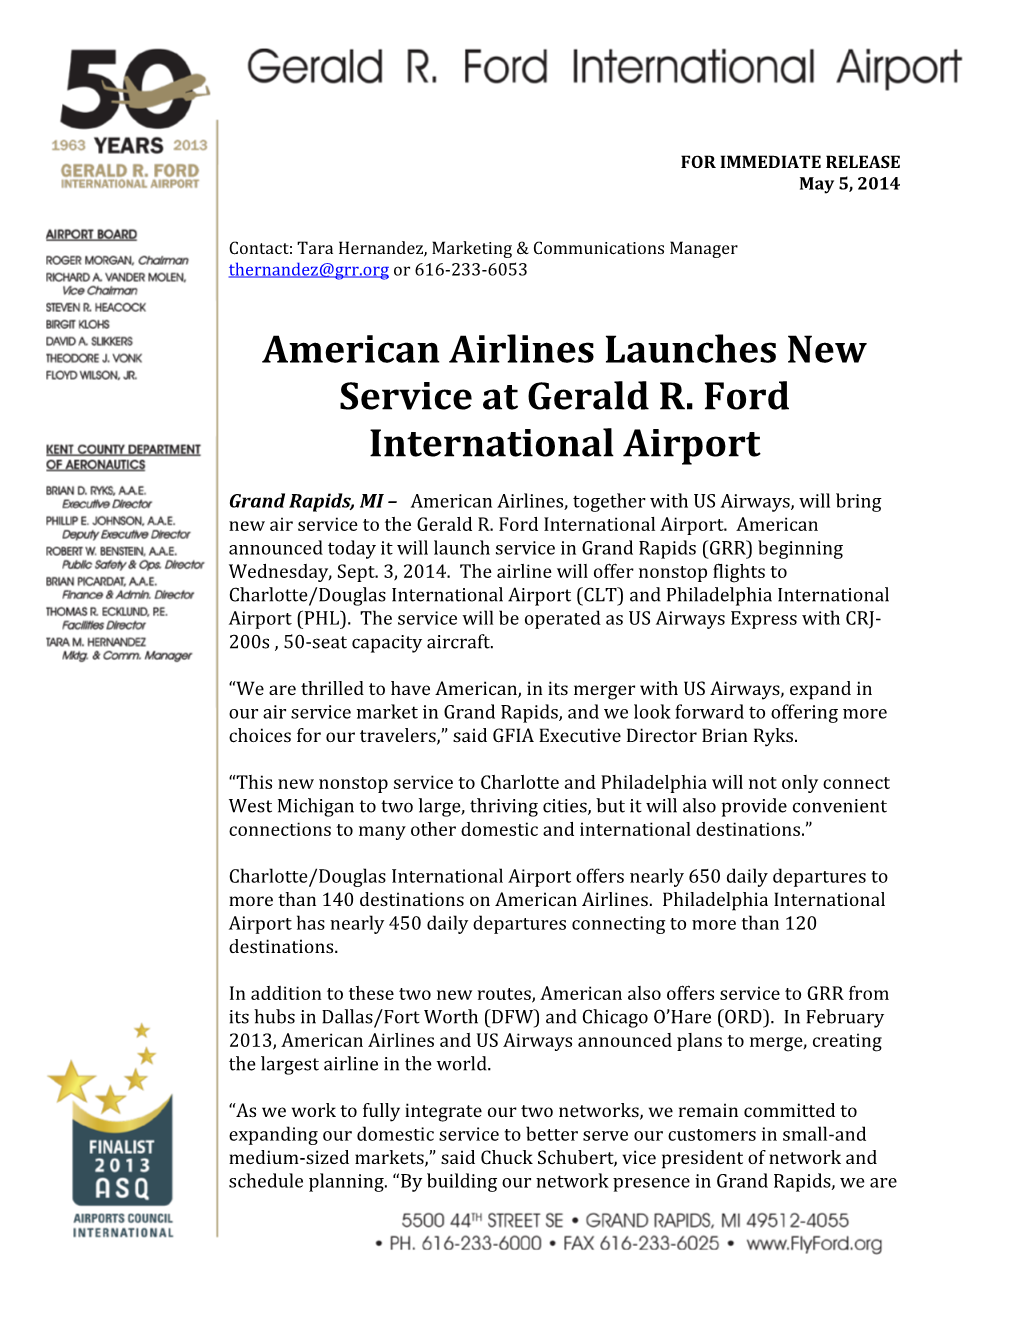 American Airlines Launches New Service at Gerald R. Ford International Airport